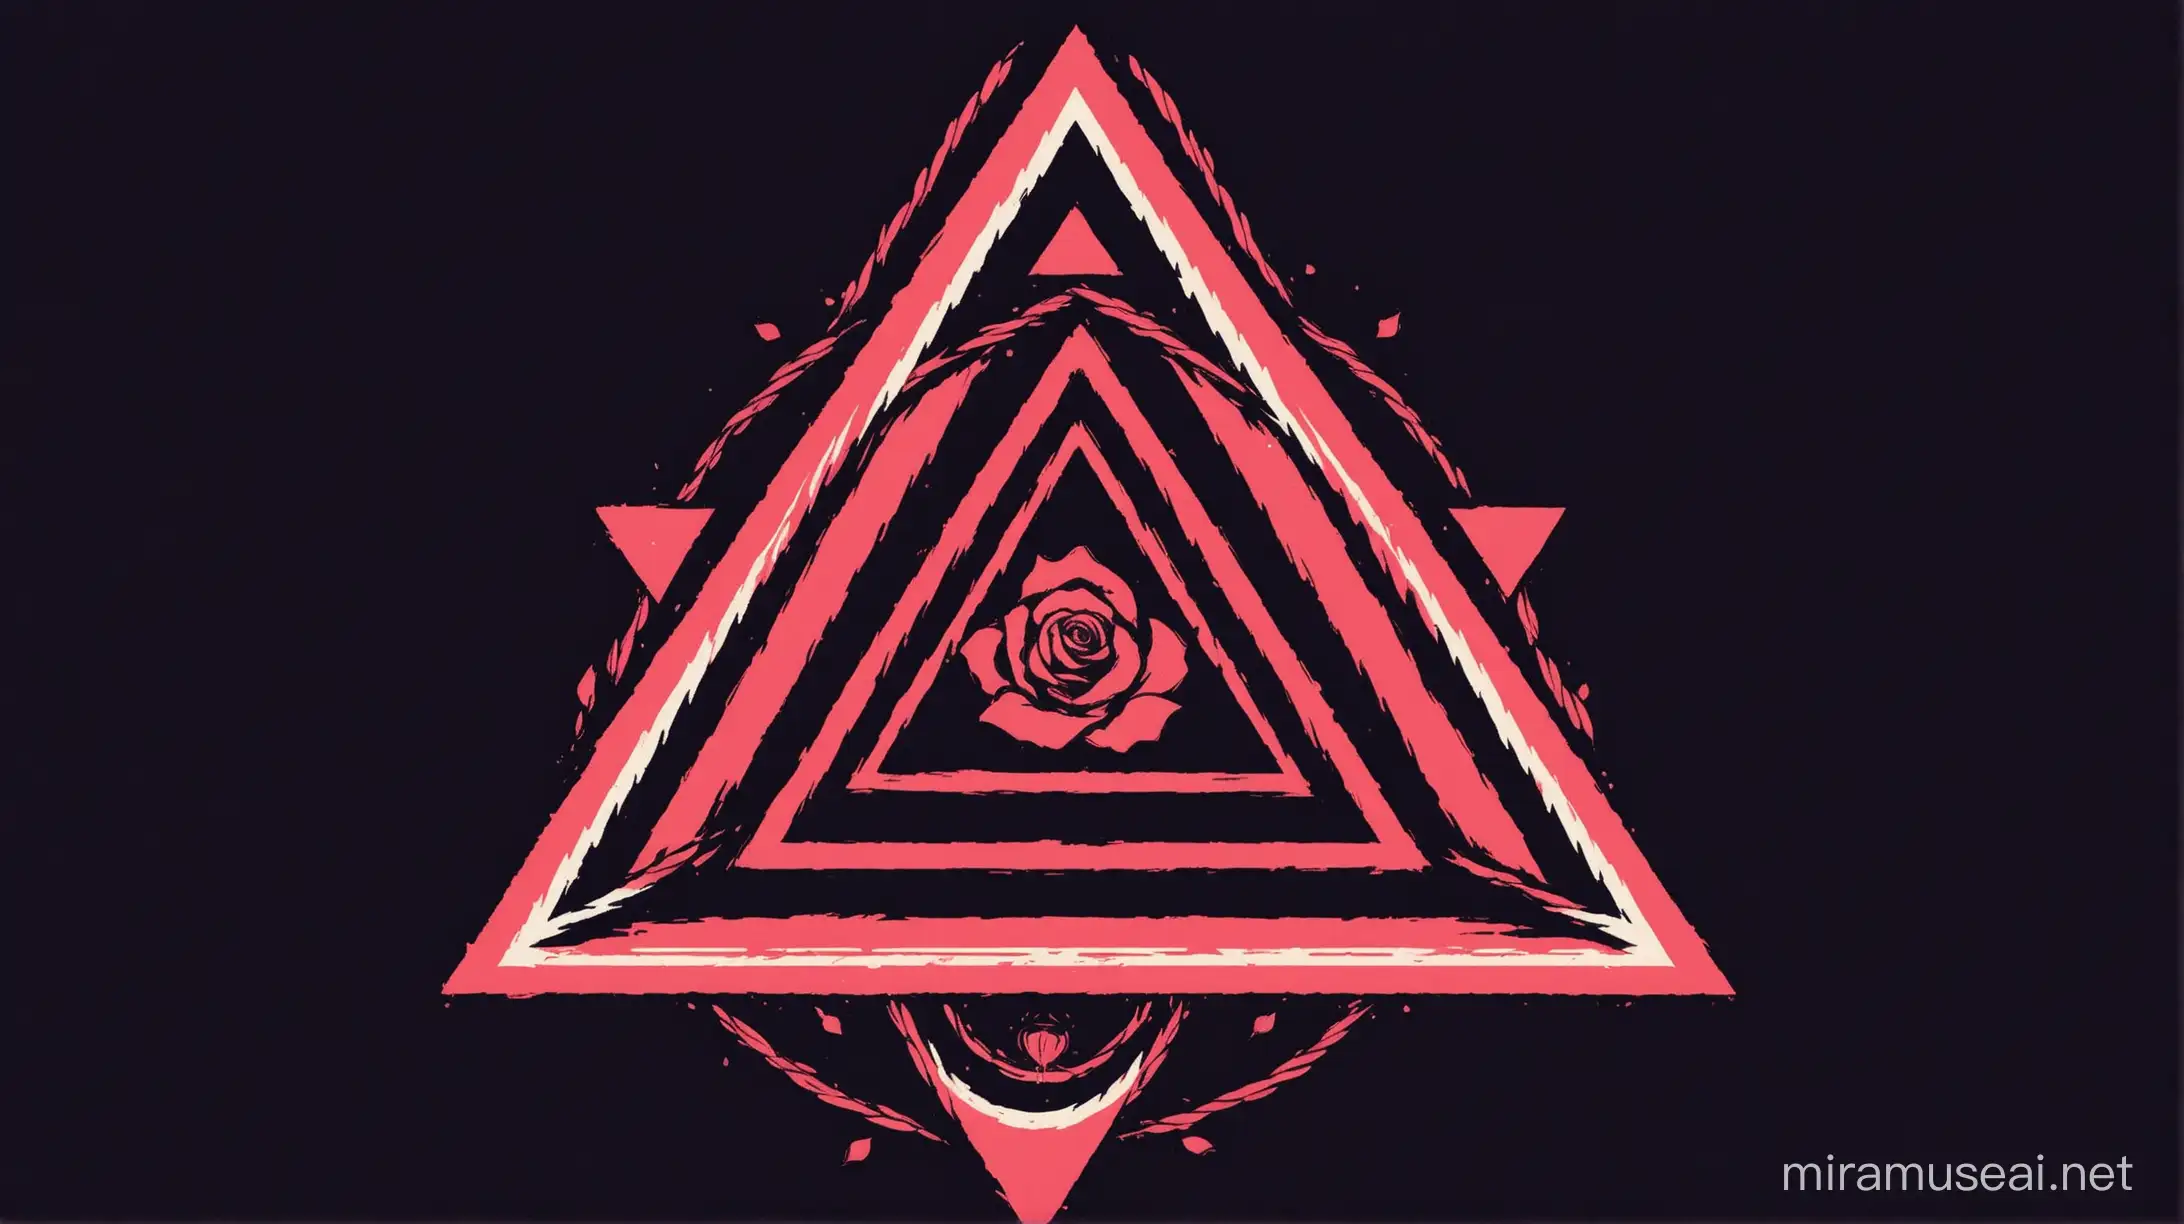 Courageous Unity Logo Design with Triangle Rose and Dark Elements